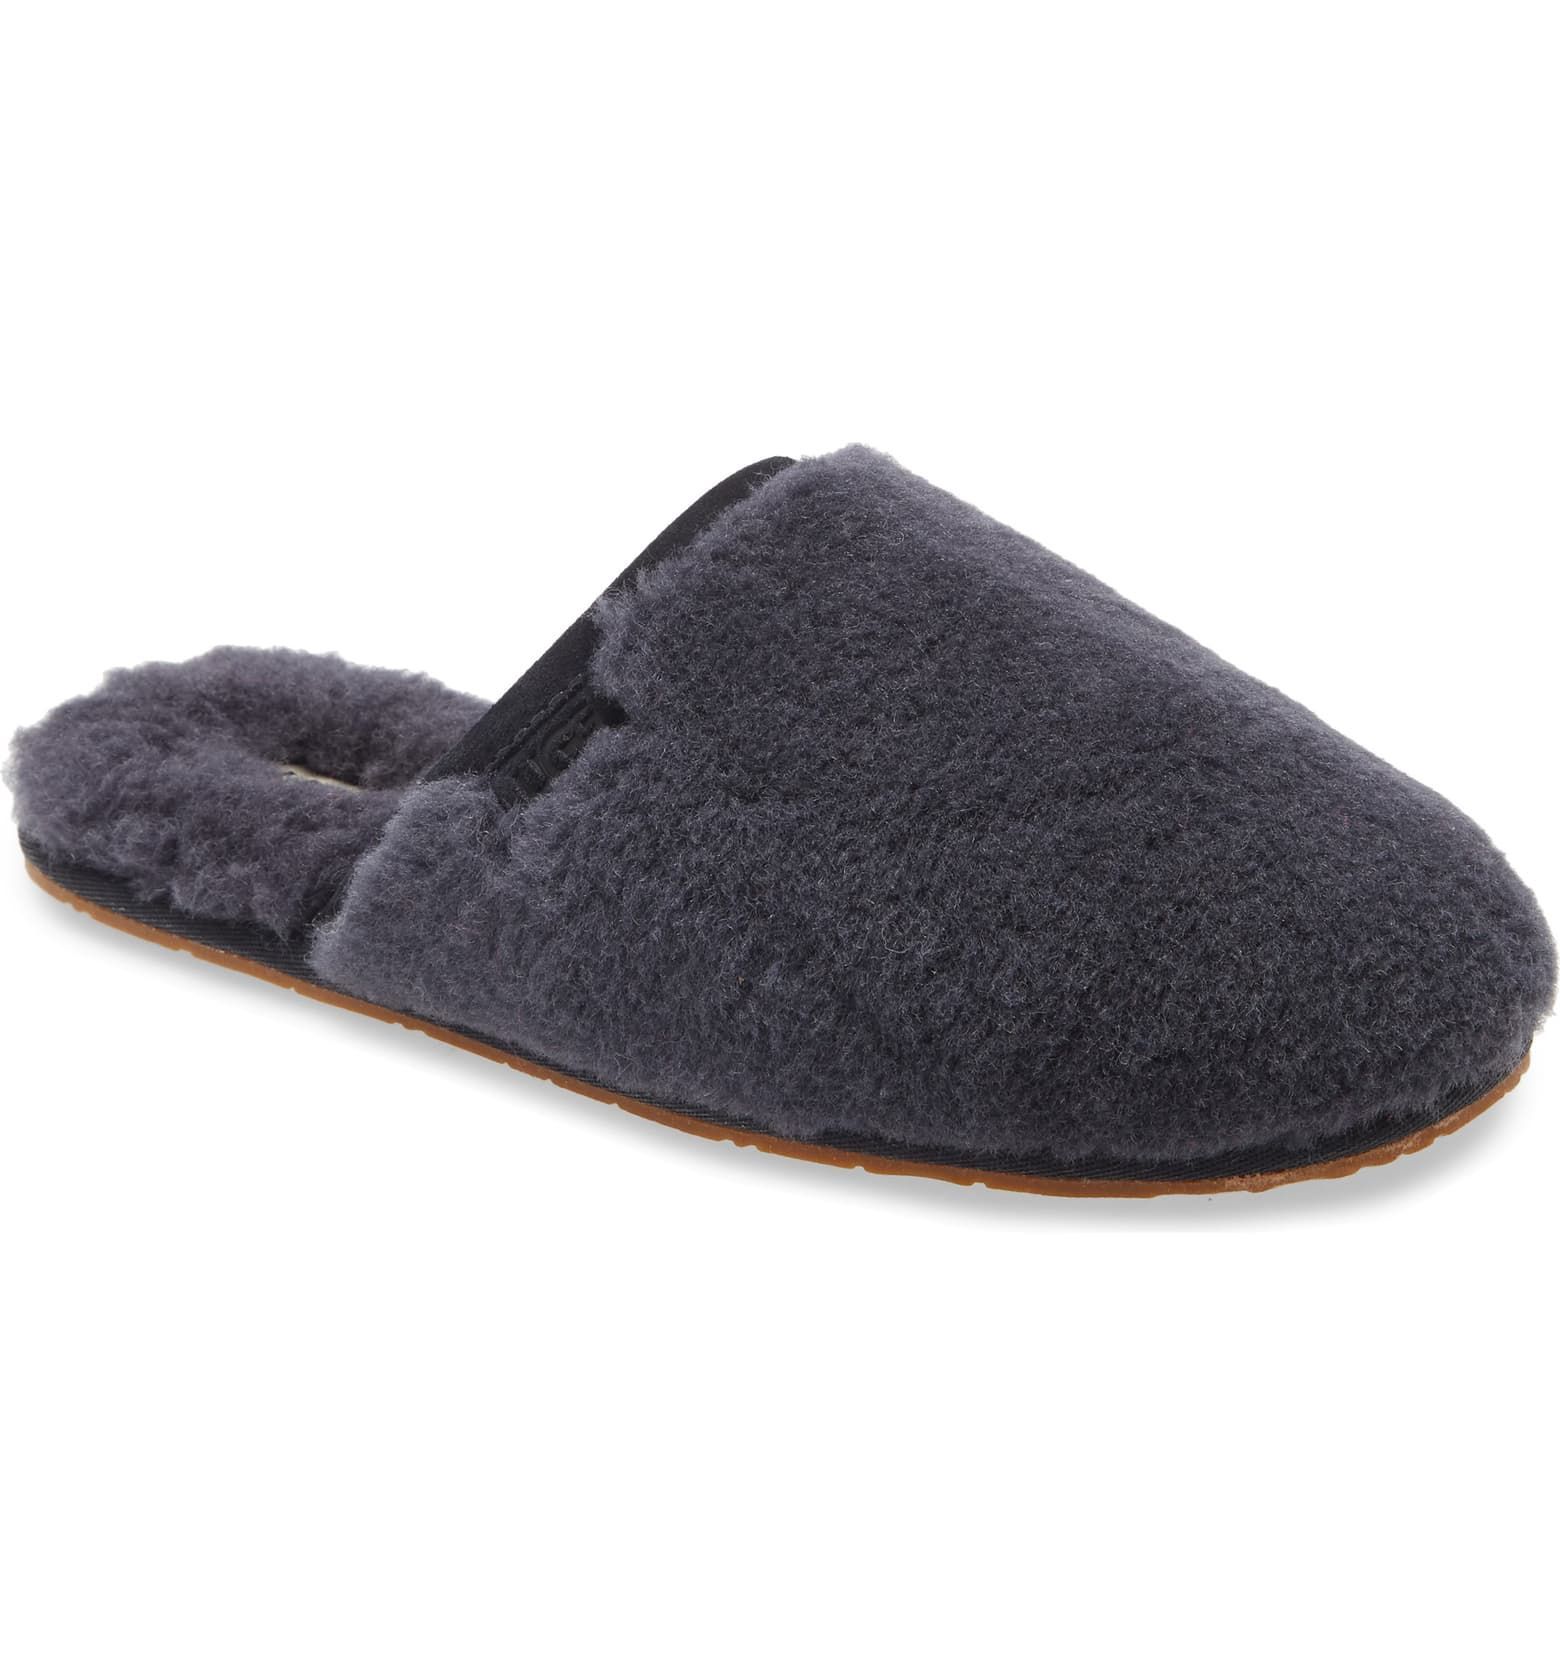 ugg slippers cheapest price